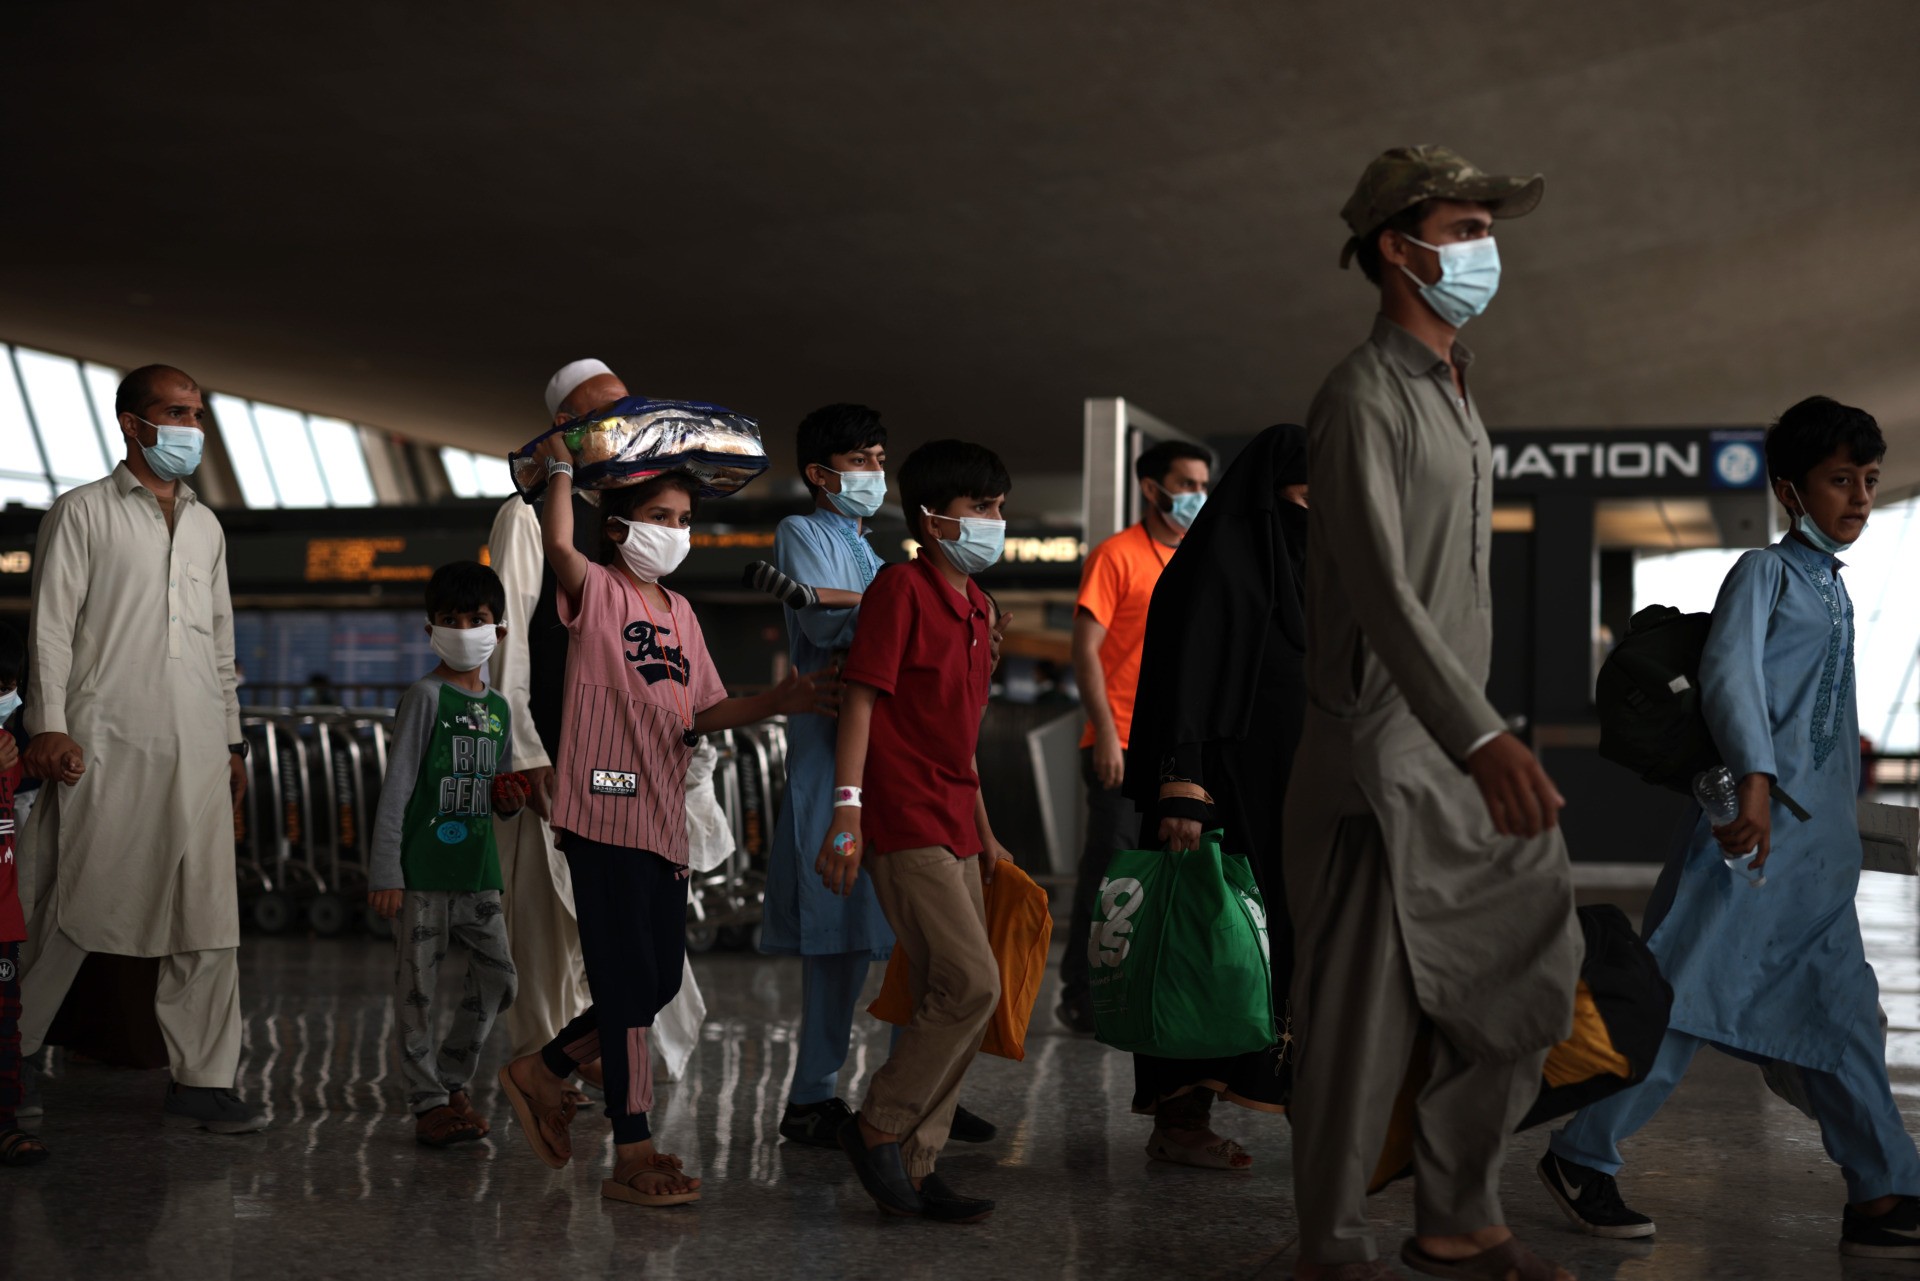 DULLES, VIRGINIA - AUGUST 31: Refugees walk through the departure terminal to a bus at Dulles International Airport after being evacuated from Kabul following the Taliban takeover of Afghanistan on August 31, 2021 in Dulles, Virginia. The Department of Defense announced yesterday that the U.S. military had completed its withdrawal from Afghanistan, ending 20 years of war. (Photo by Anna Moneymaker/Getty Images)